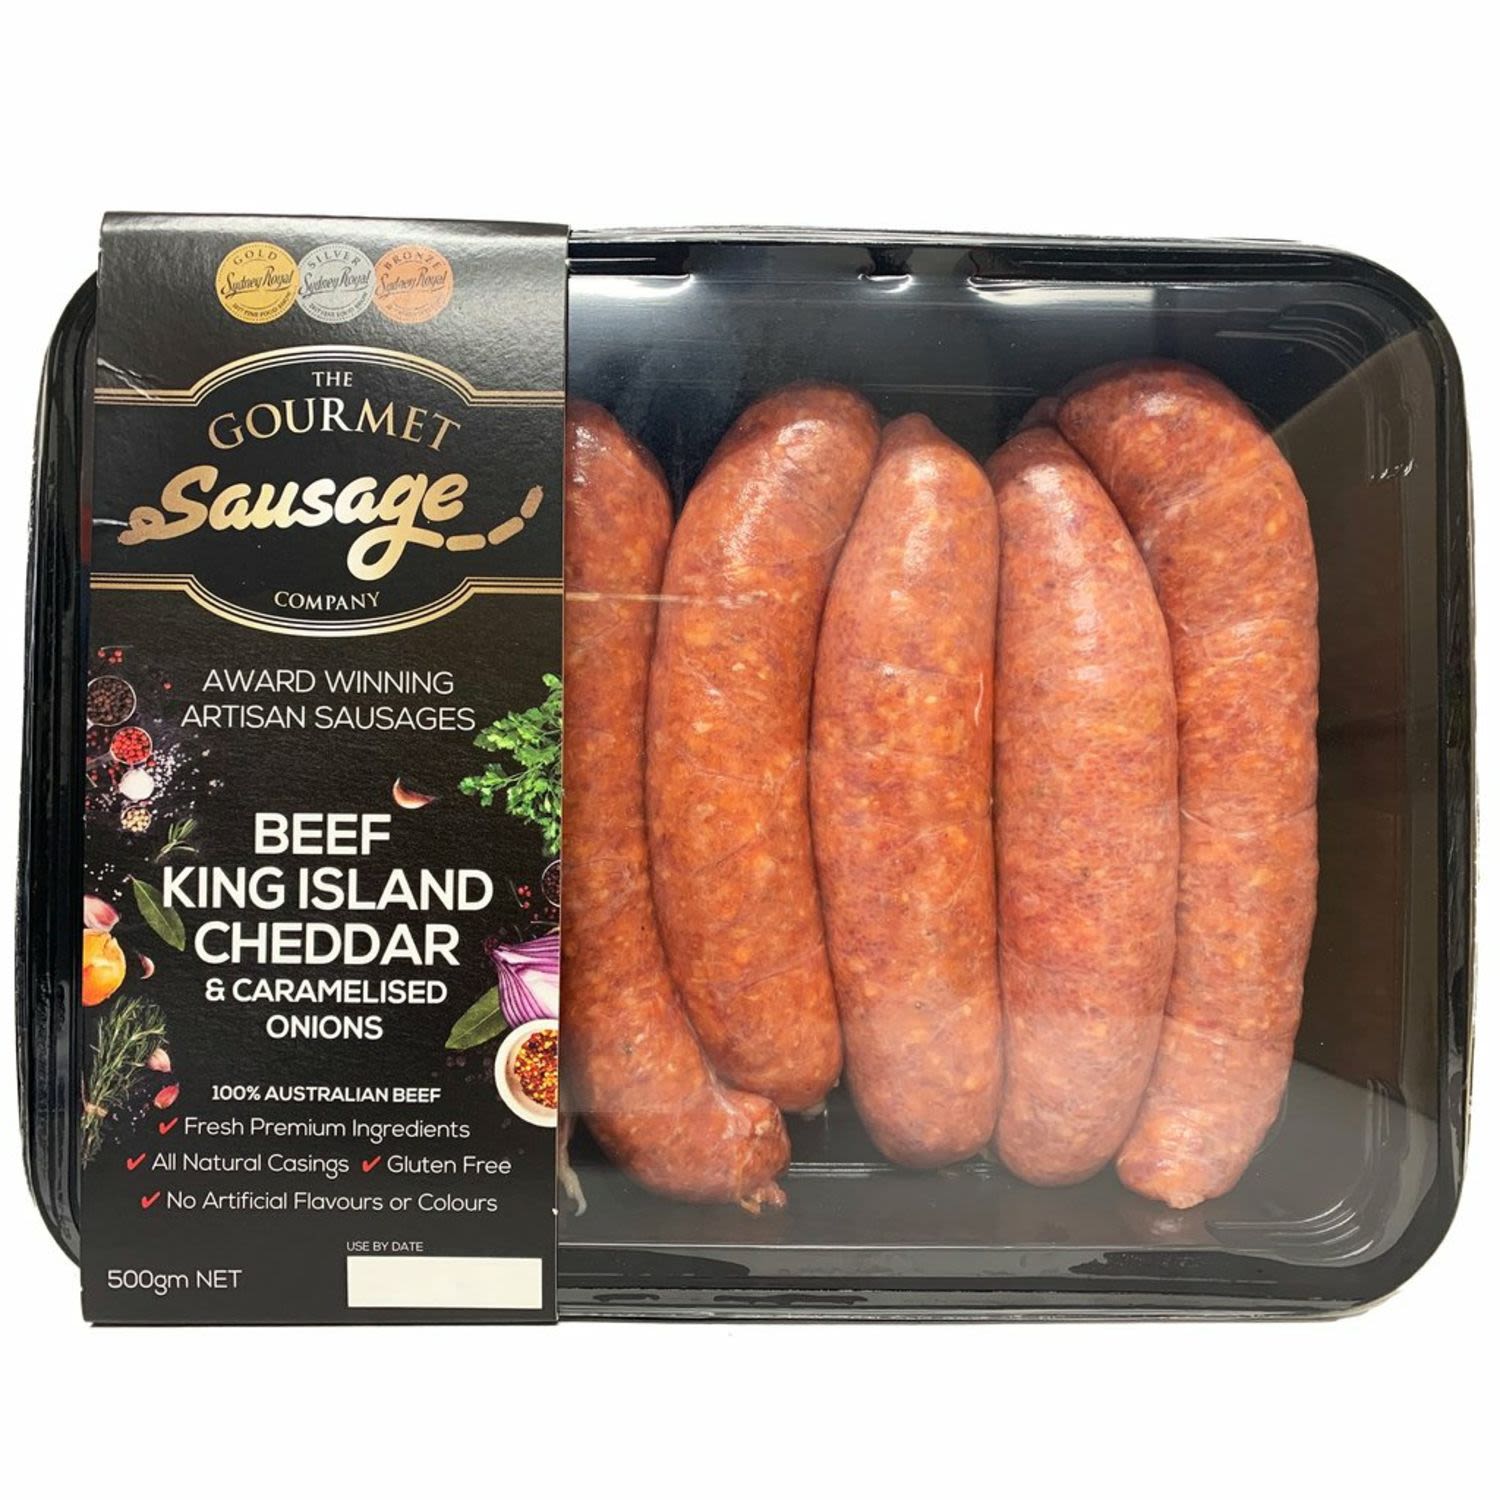 The Gourmet Sausage Company Beef Sausage Vintage Cheddar and Caramelised Onion, 500 Gram